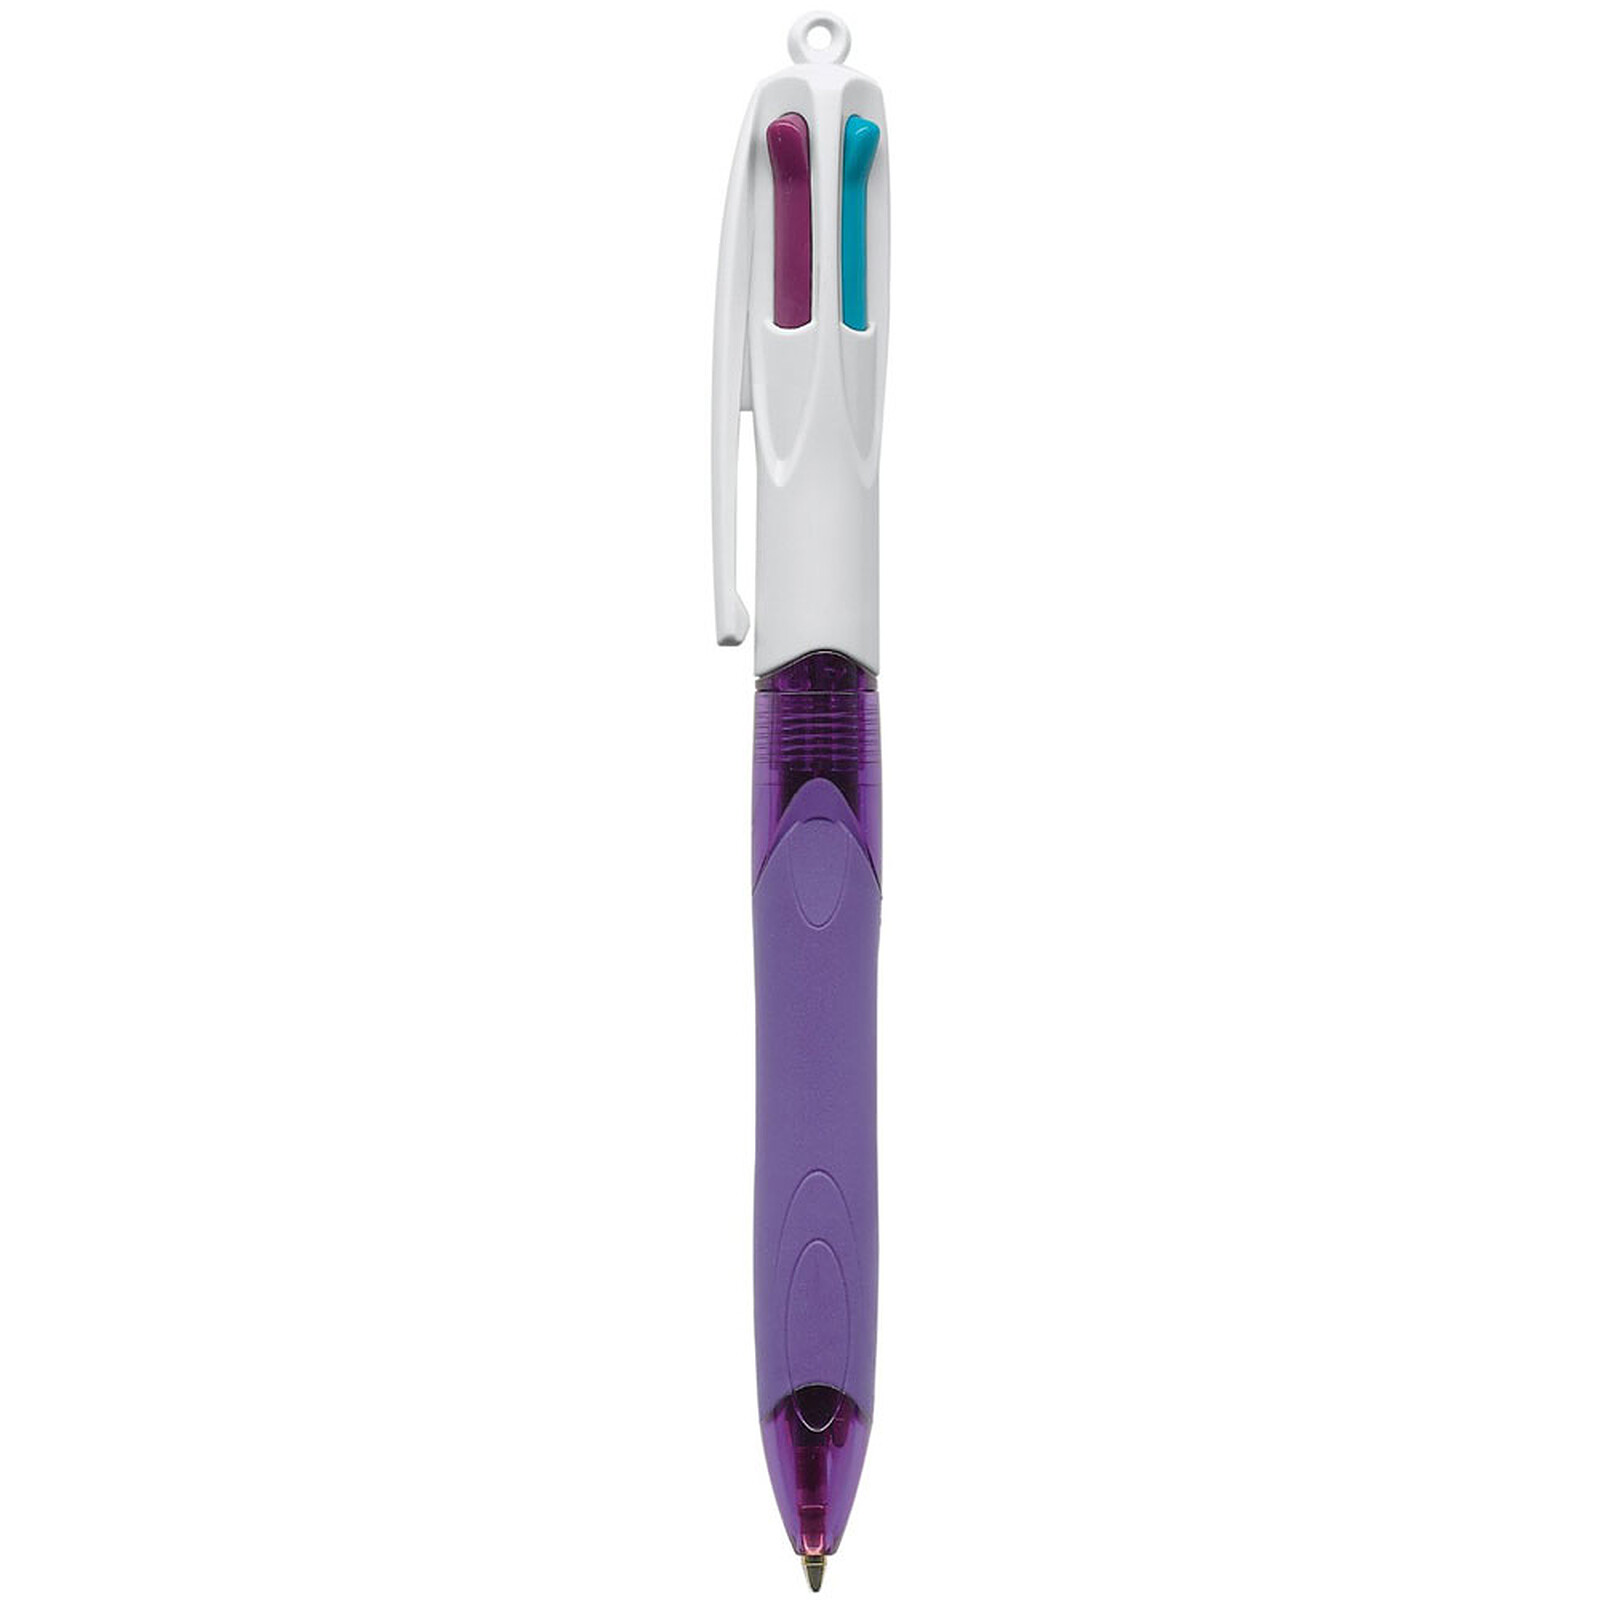 Stylo 4 couleurs Bic - TY